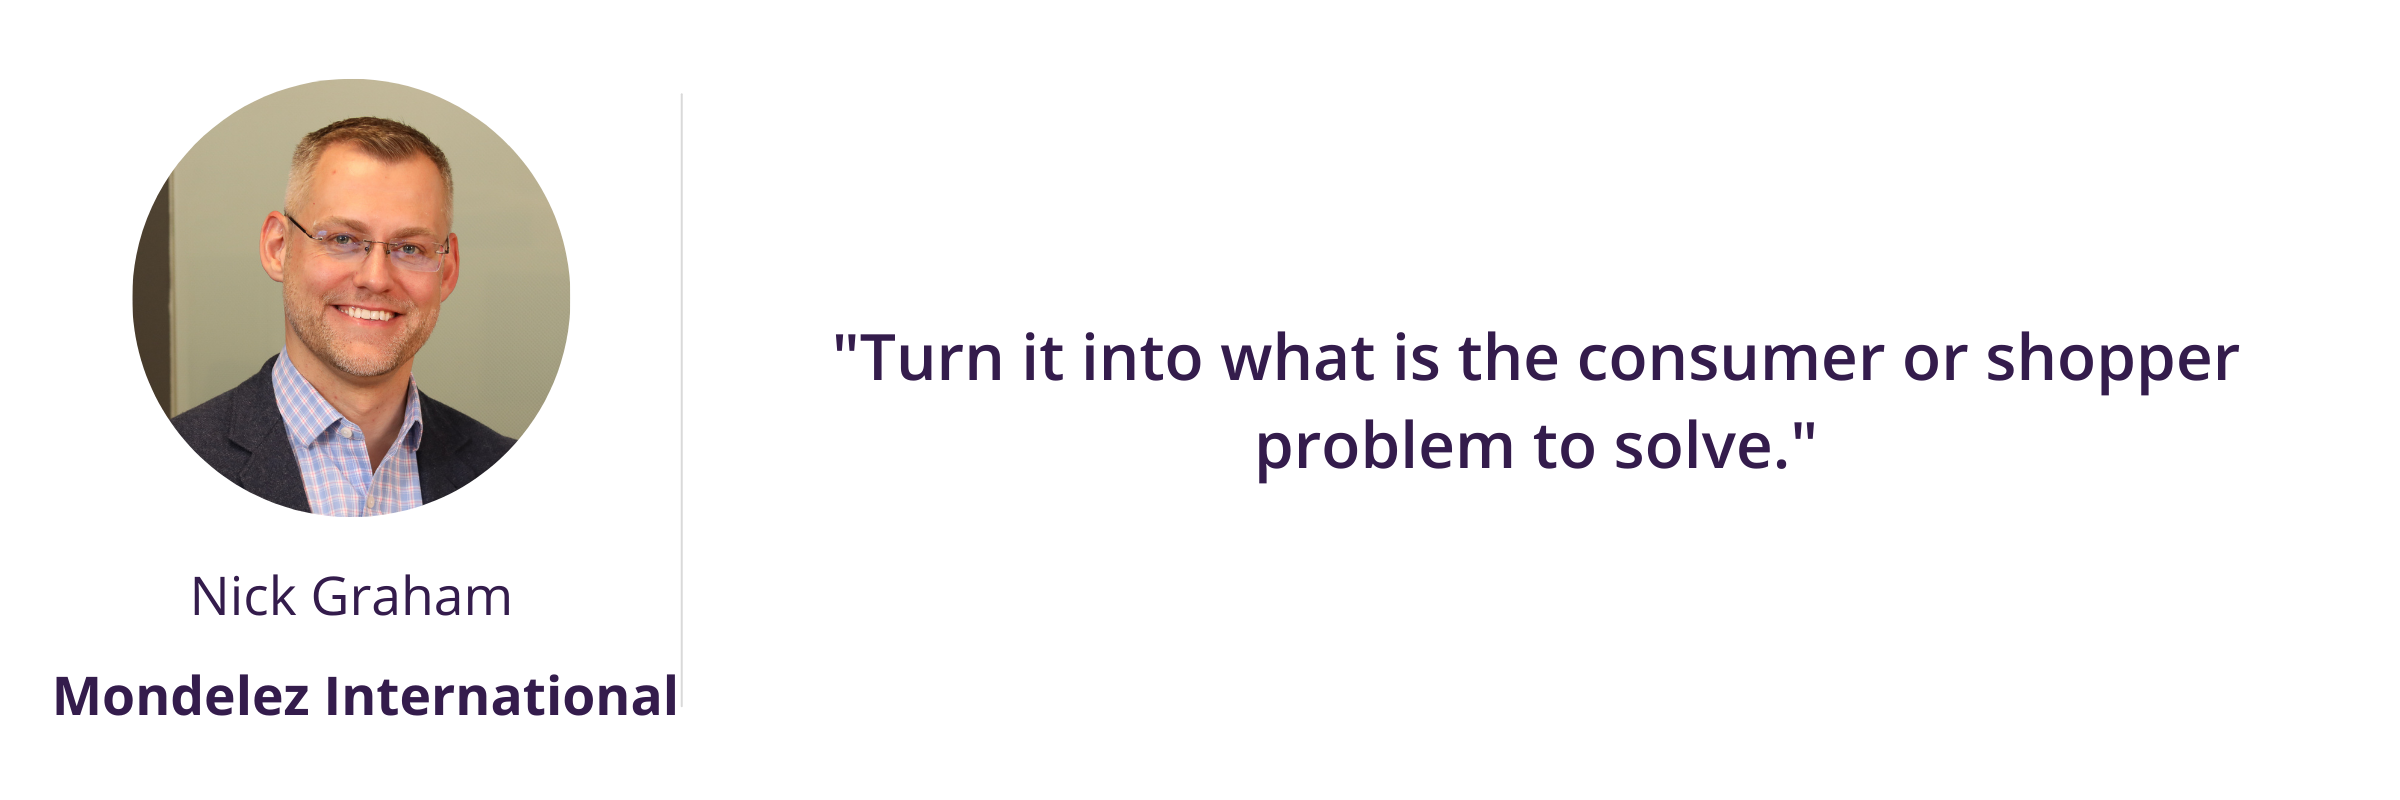 "Turn it into what is the consumer or shopper problem to solve."